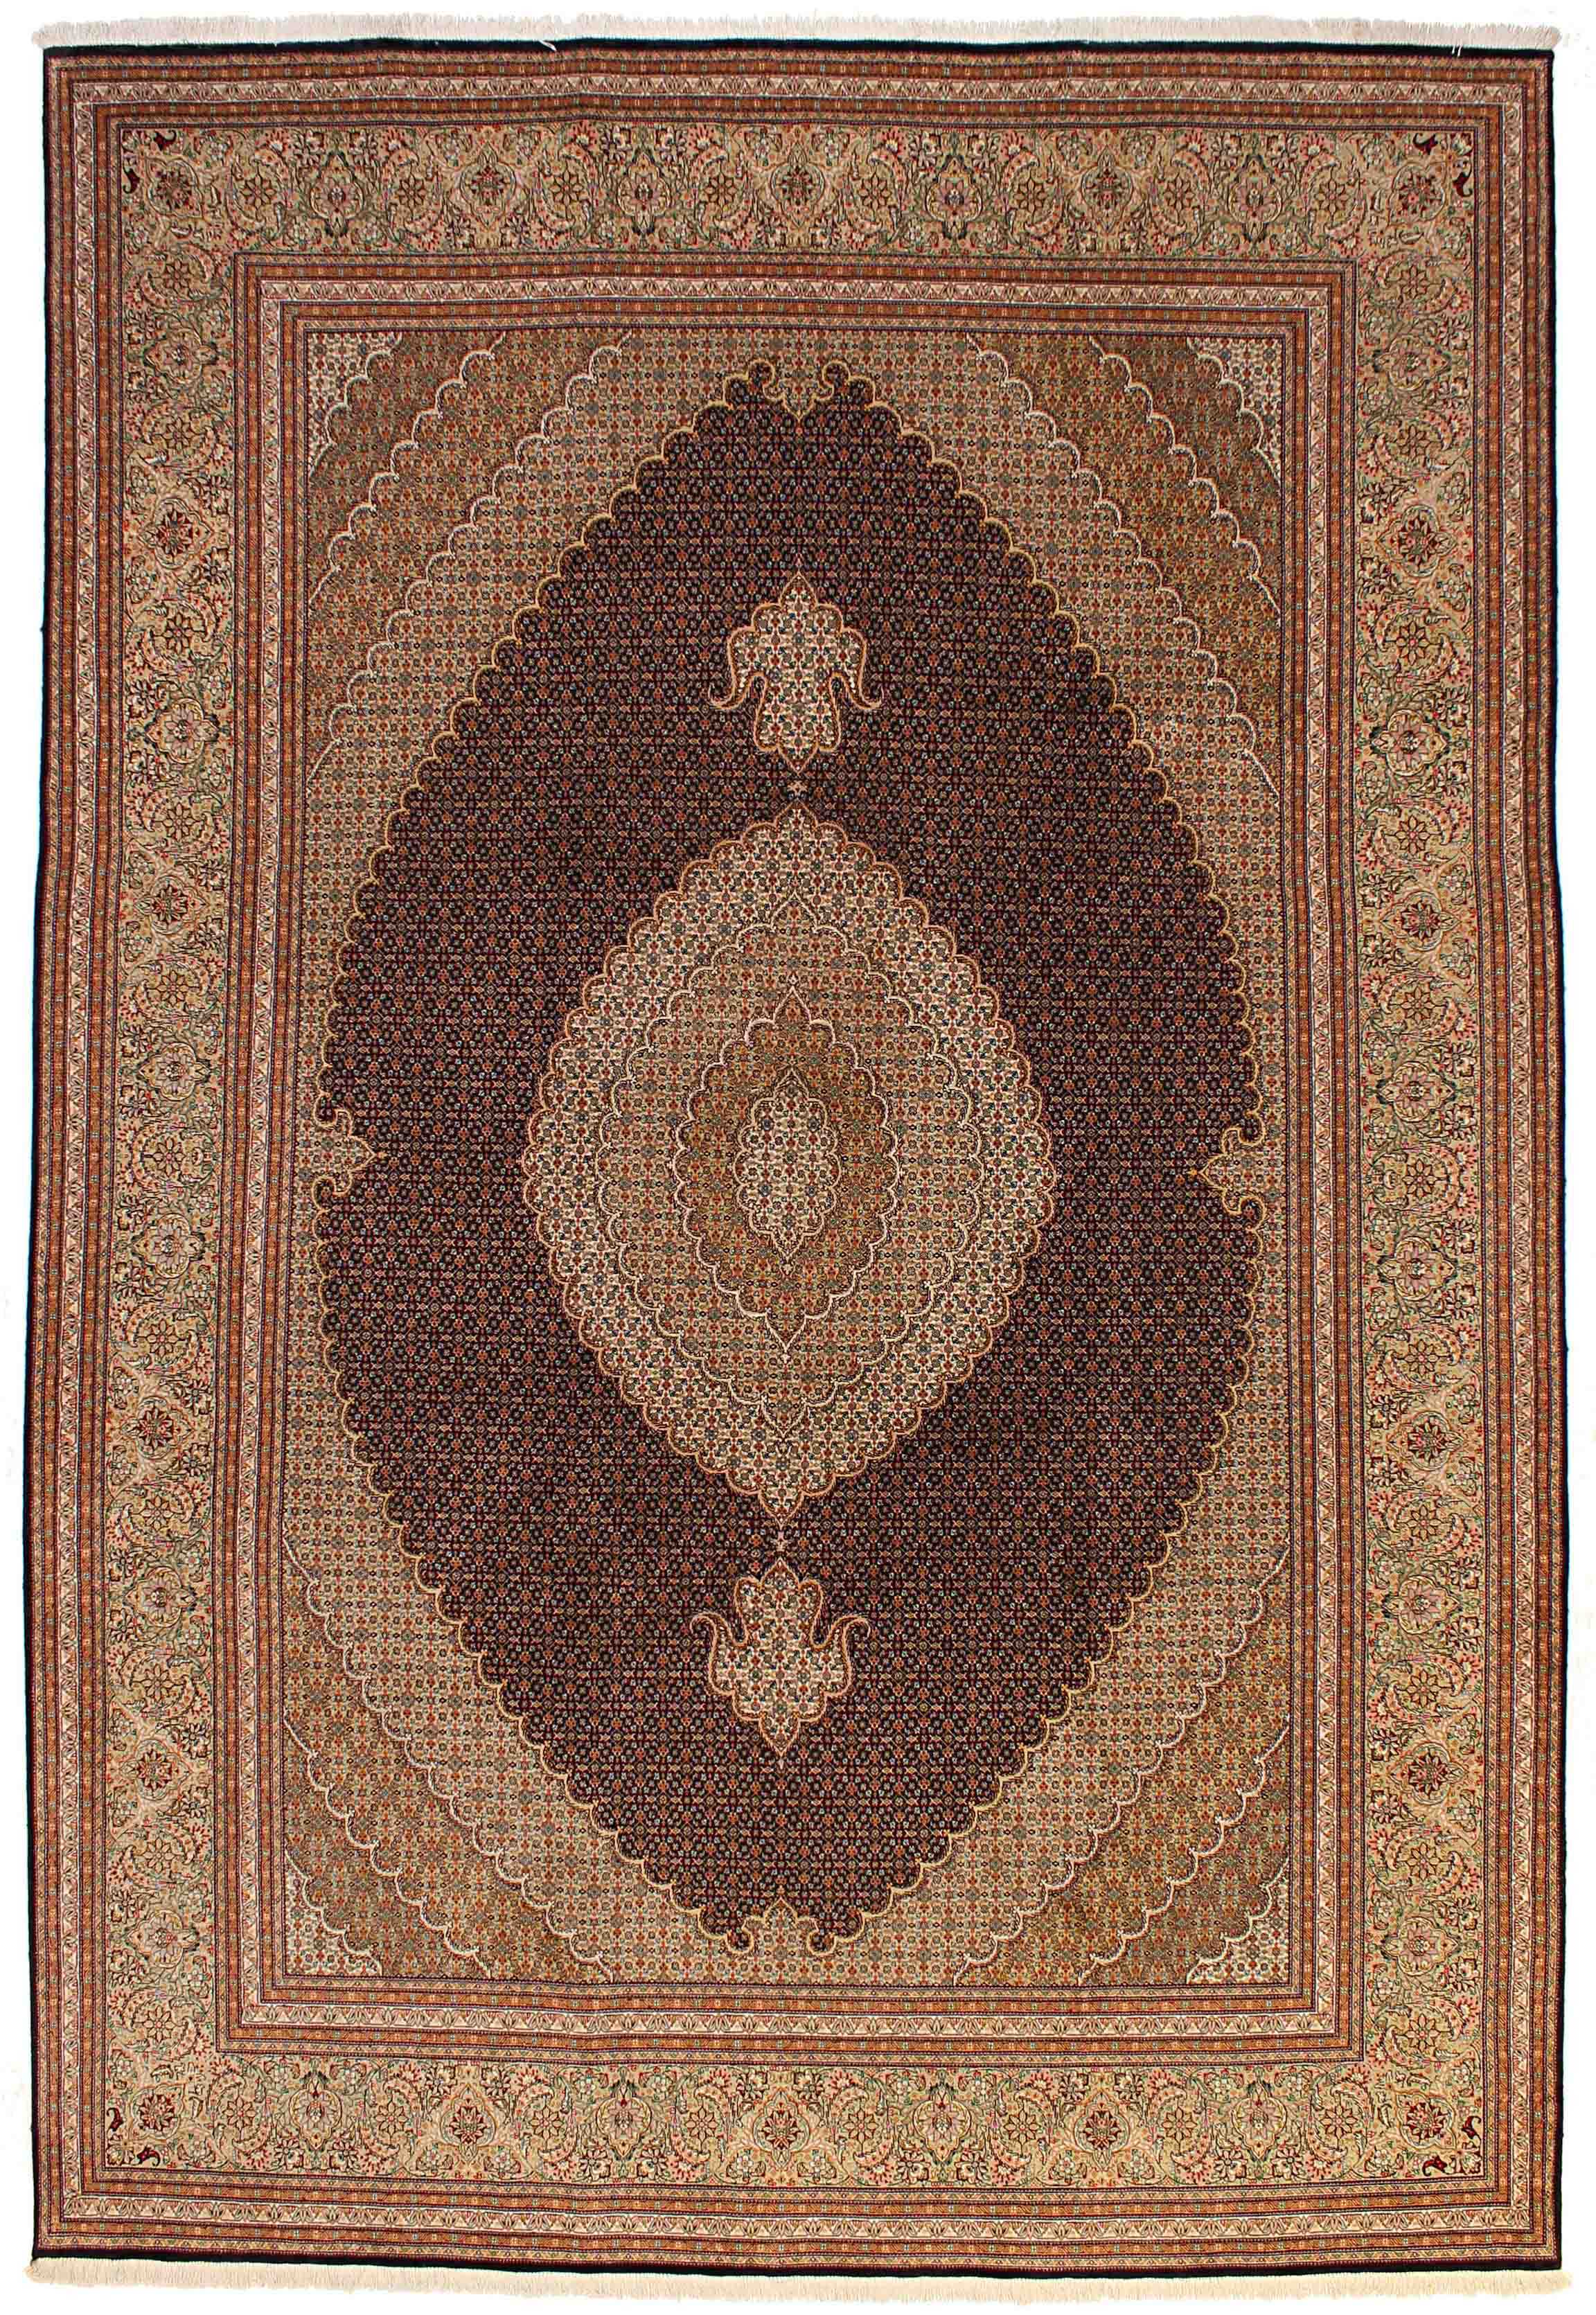 multicolour persian rug with traditional floral pattern in cream, blue and red